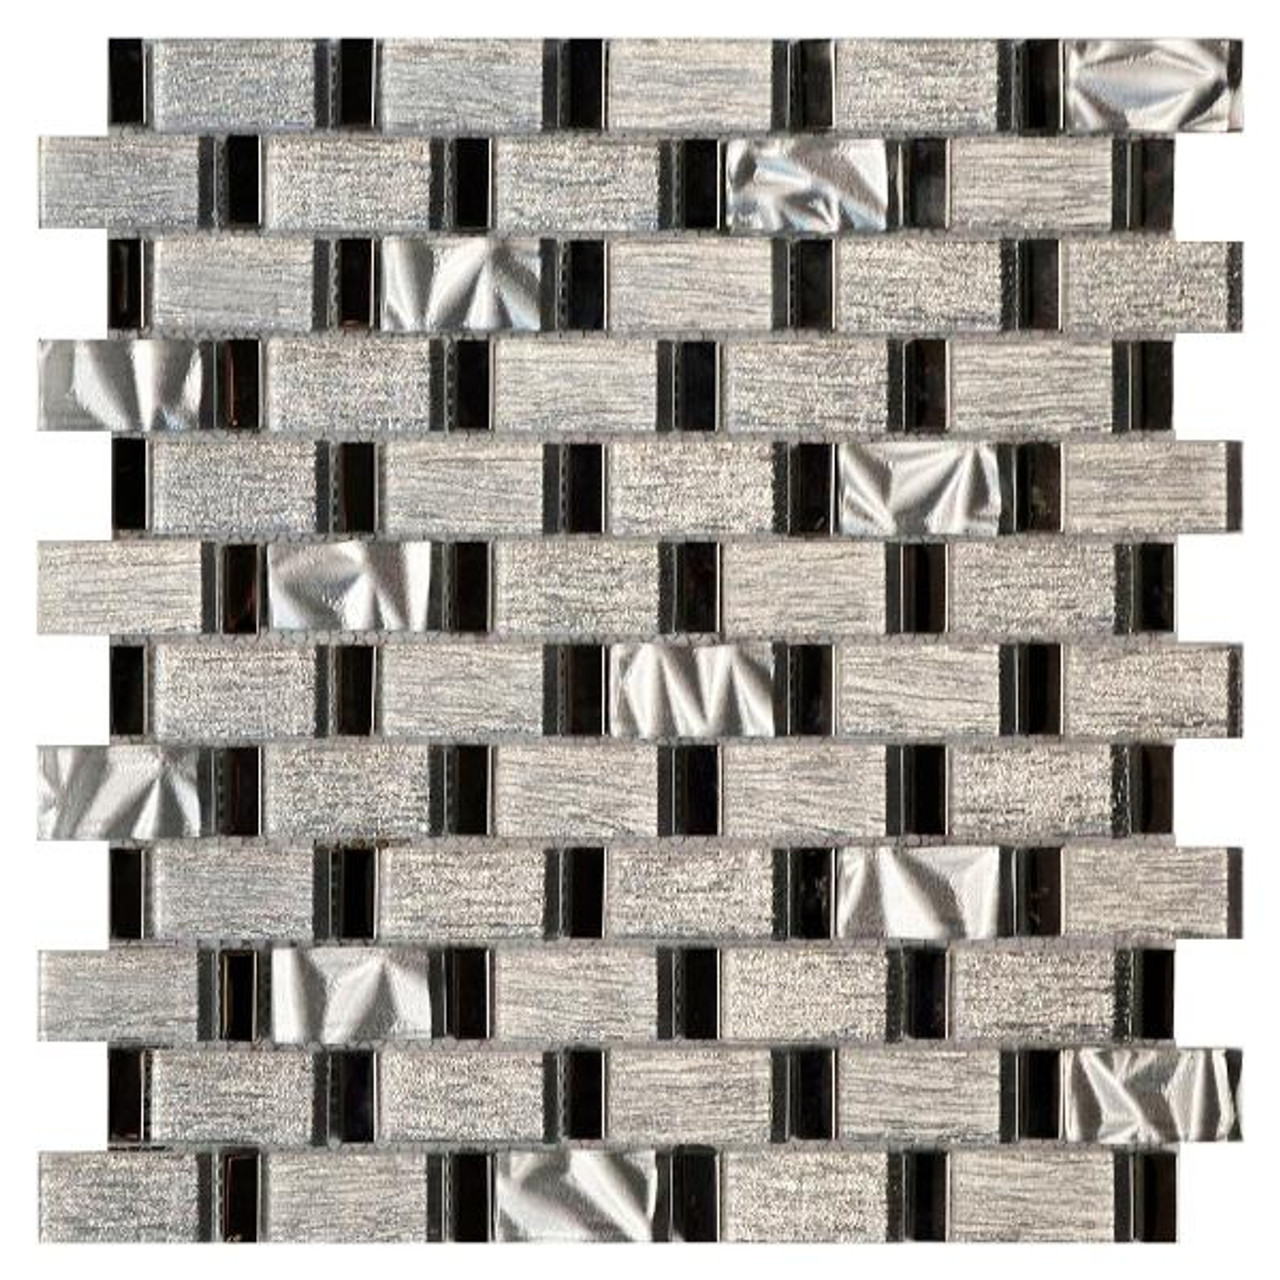 Glamour Linear Glass Mosaic - EACH - Tile Outlets of America